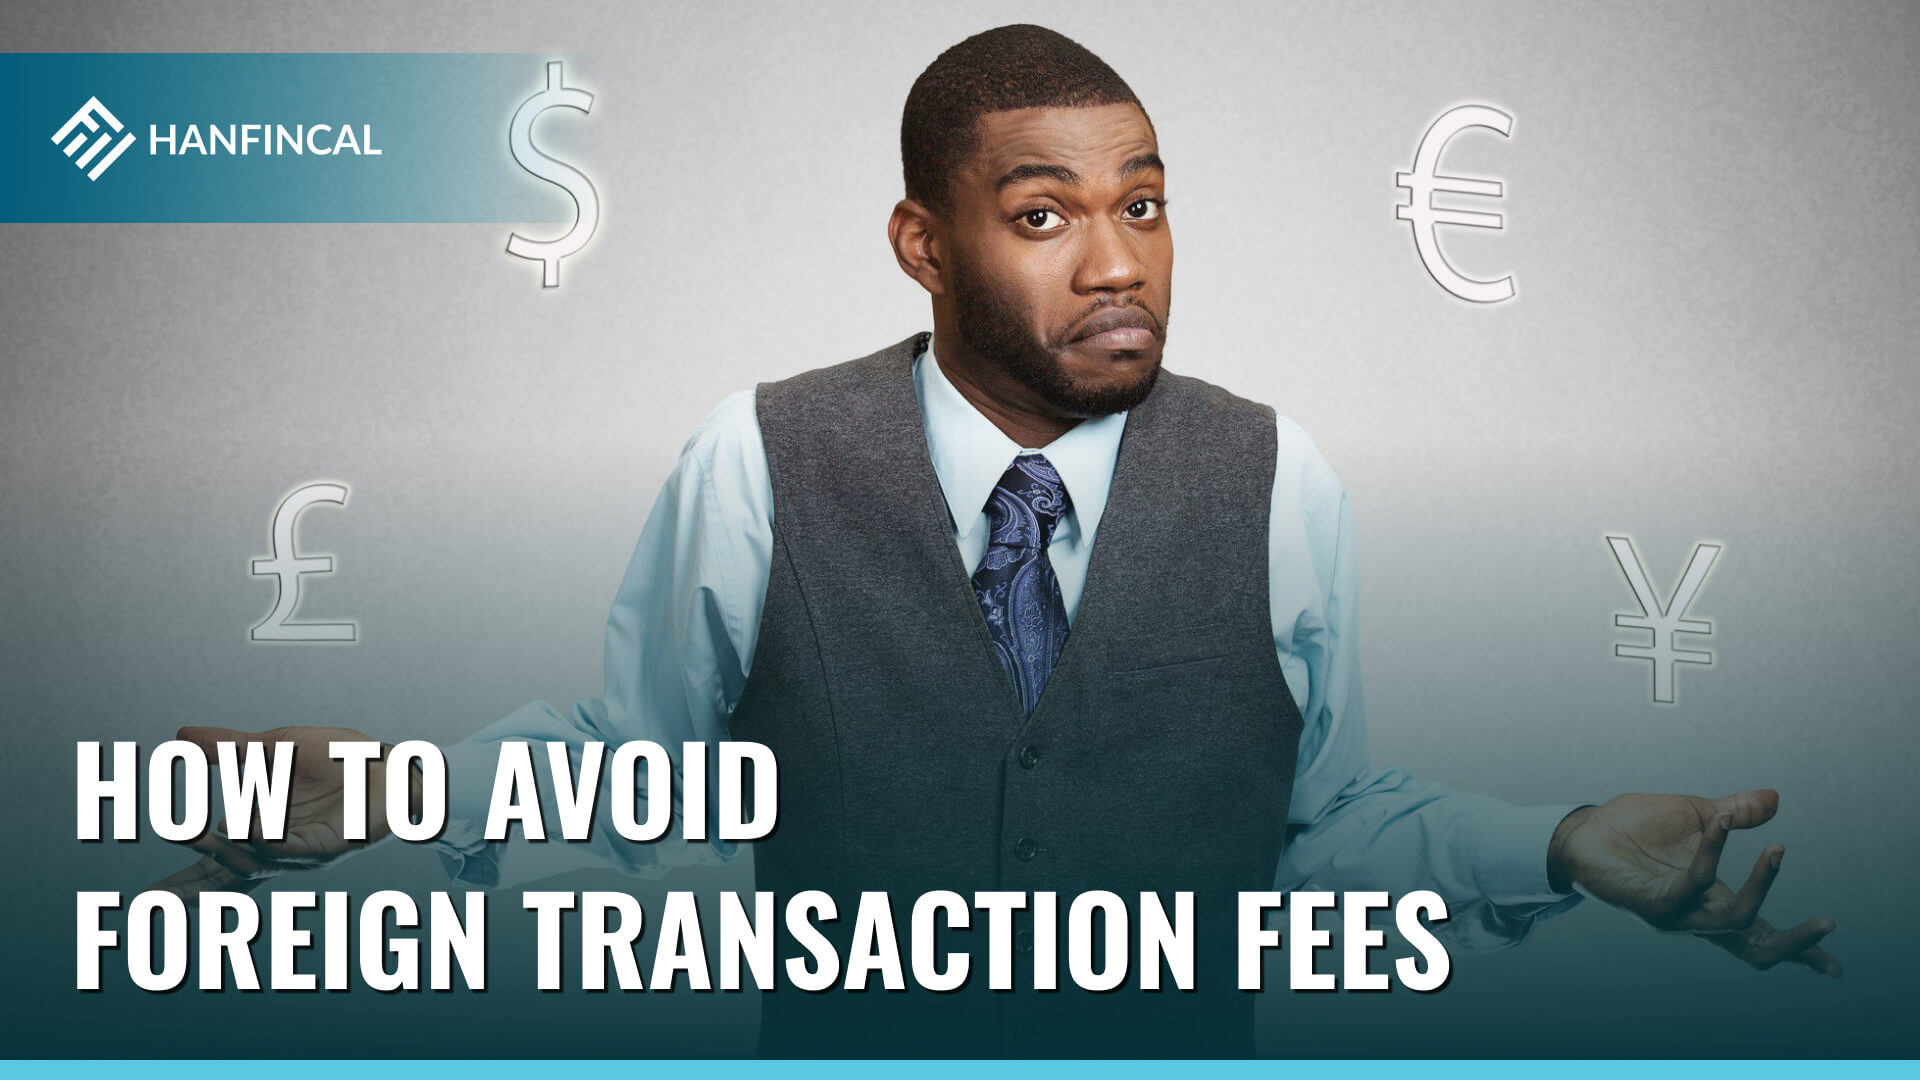 How to avoid foreign transaction fees?